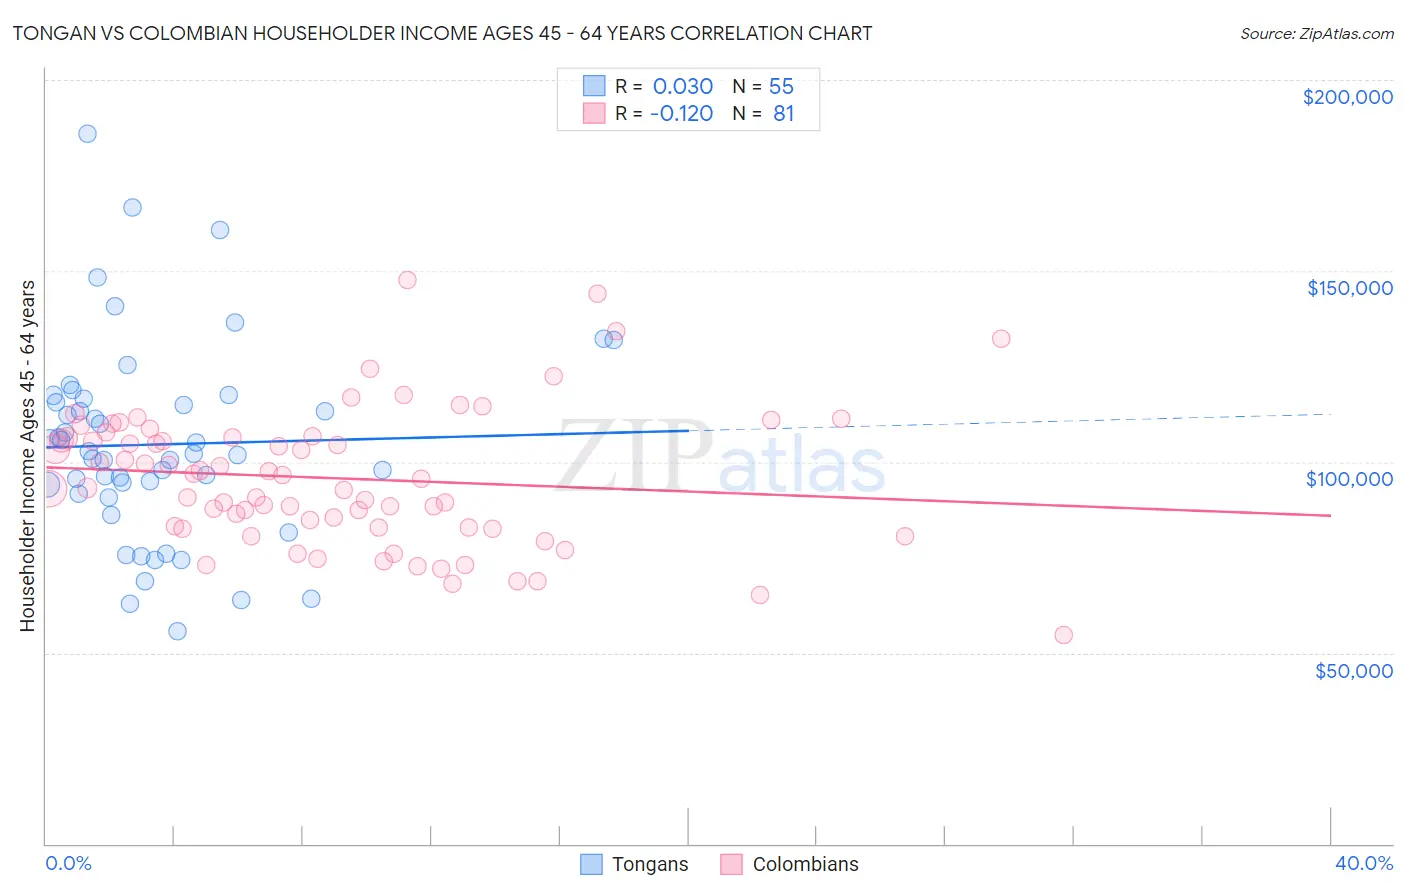 Tongan vs Colombian Householder Income Ages 45 - 64 years